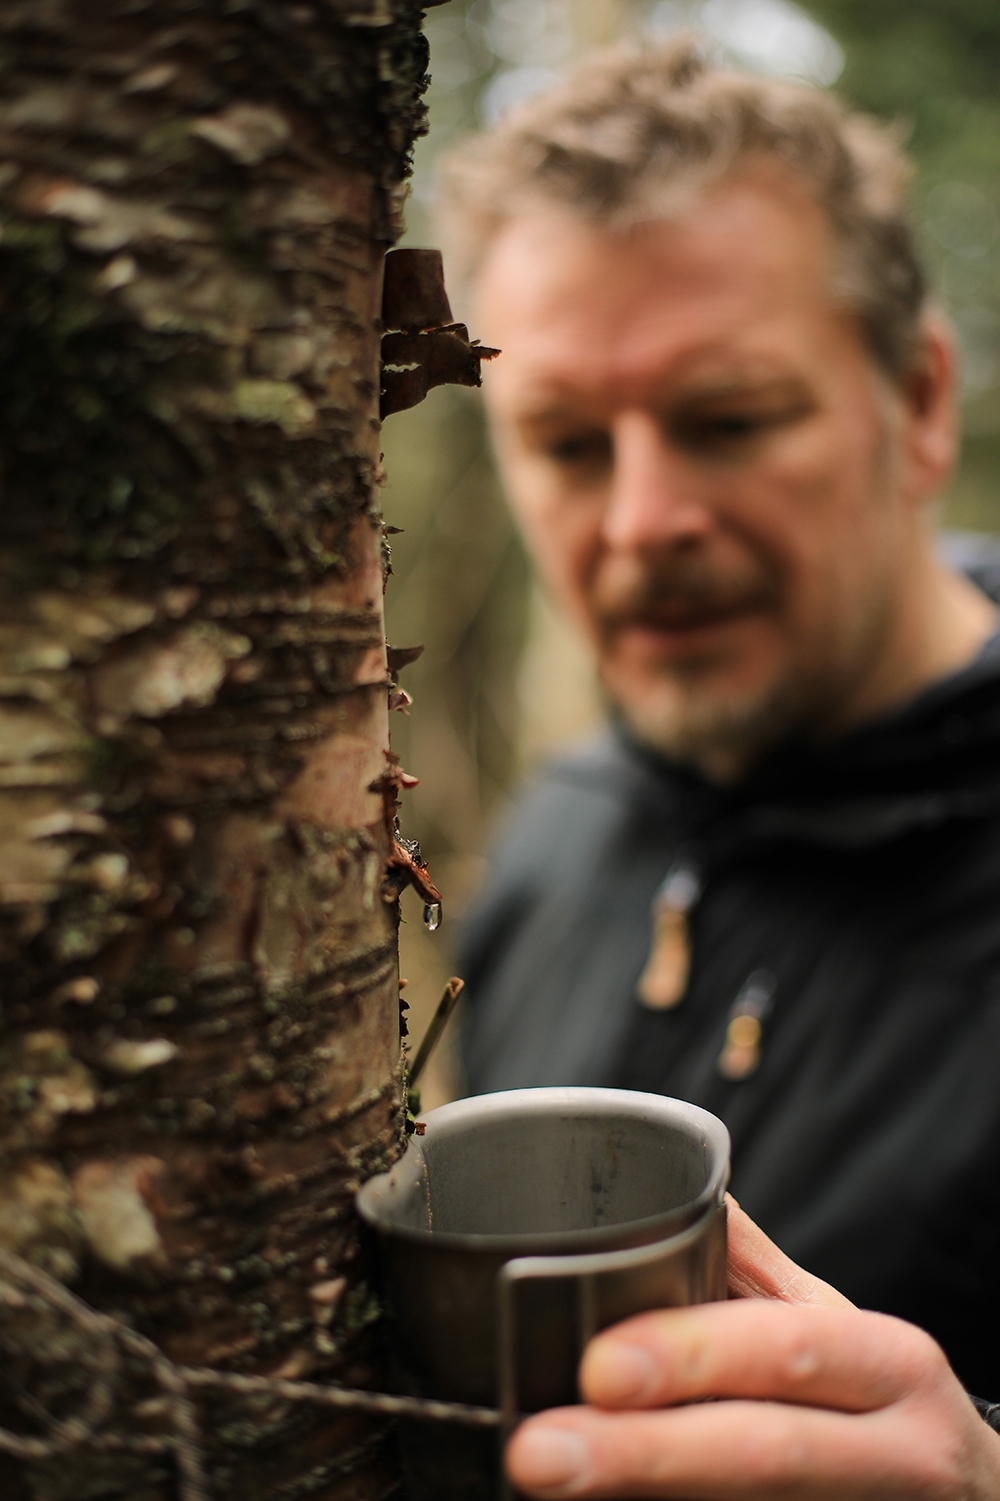 Chris Morgan collecting sap from tree